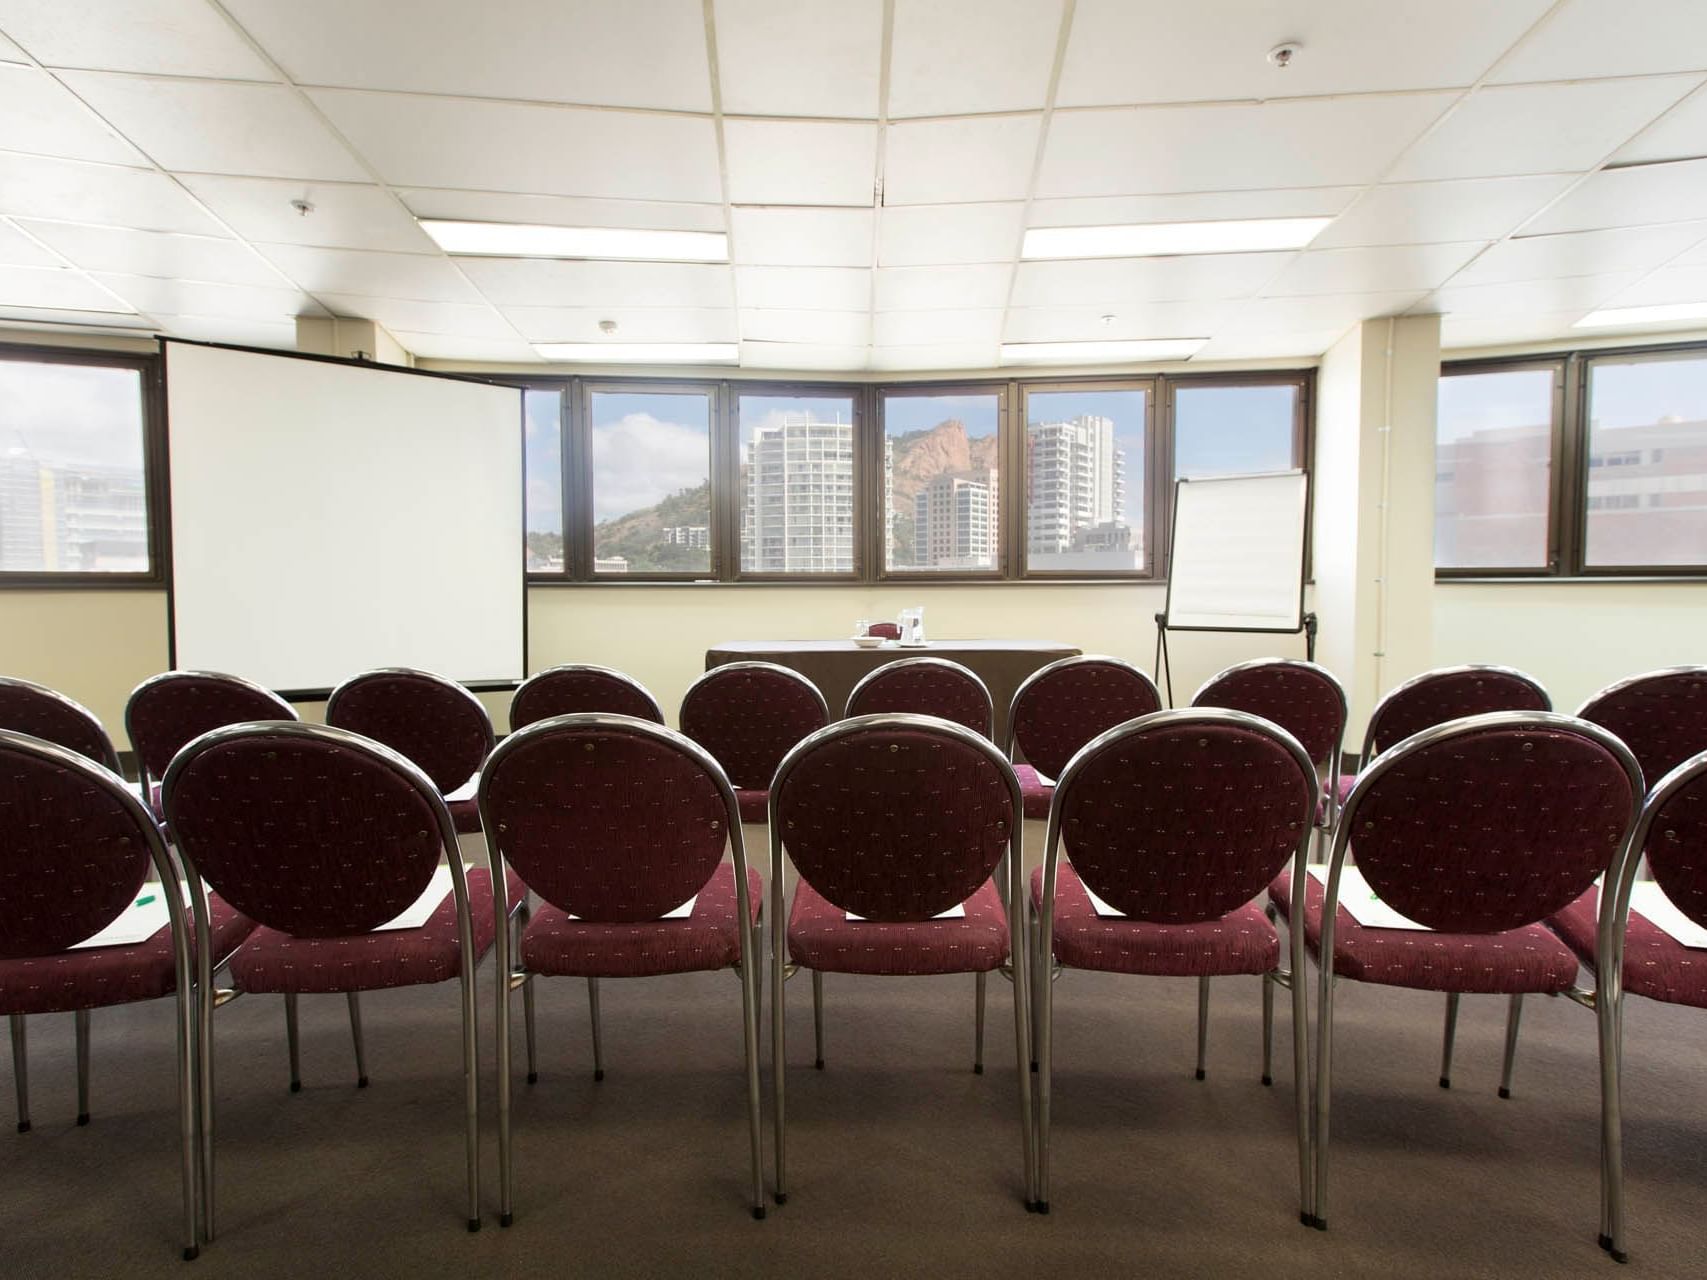 Classroom set-up in Castle Hill meeting room at Hotel Grand Chancellor Townsville